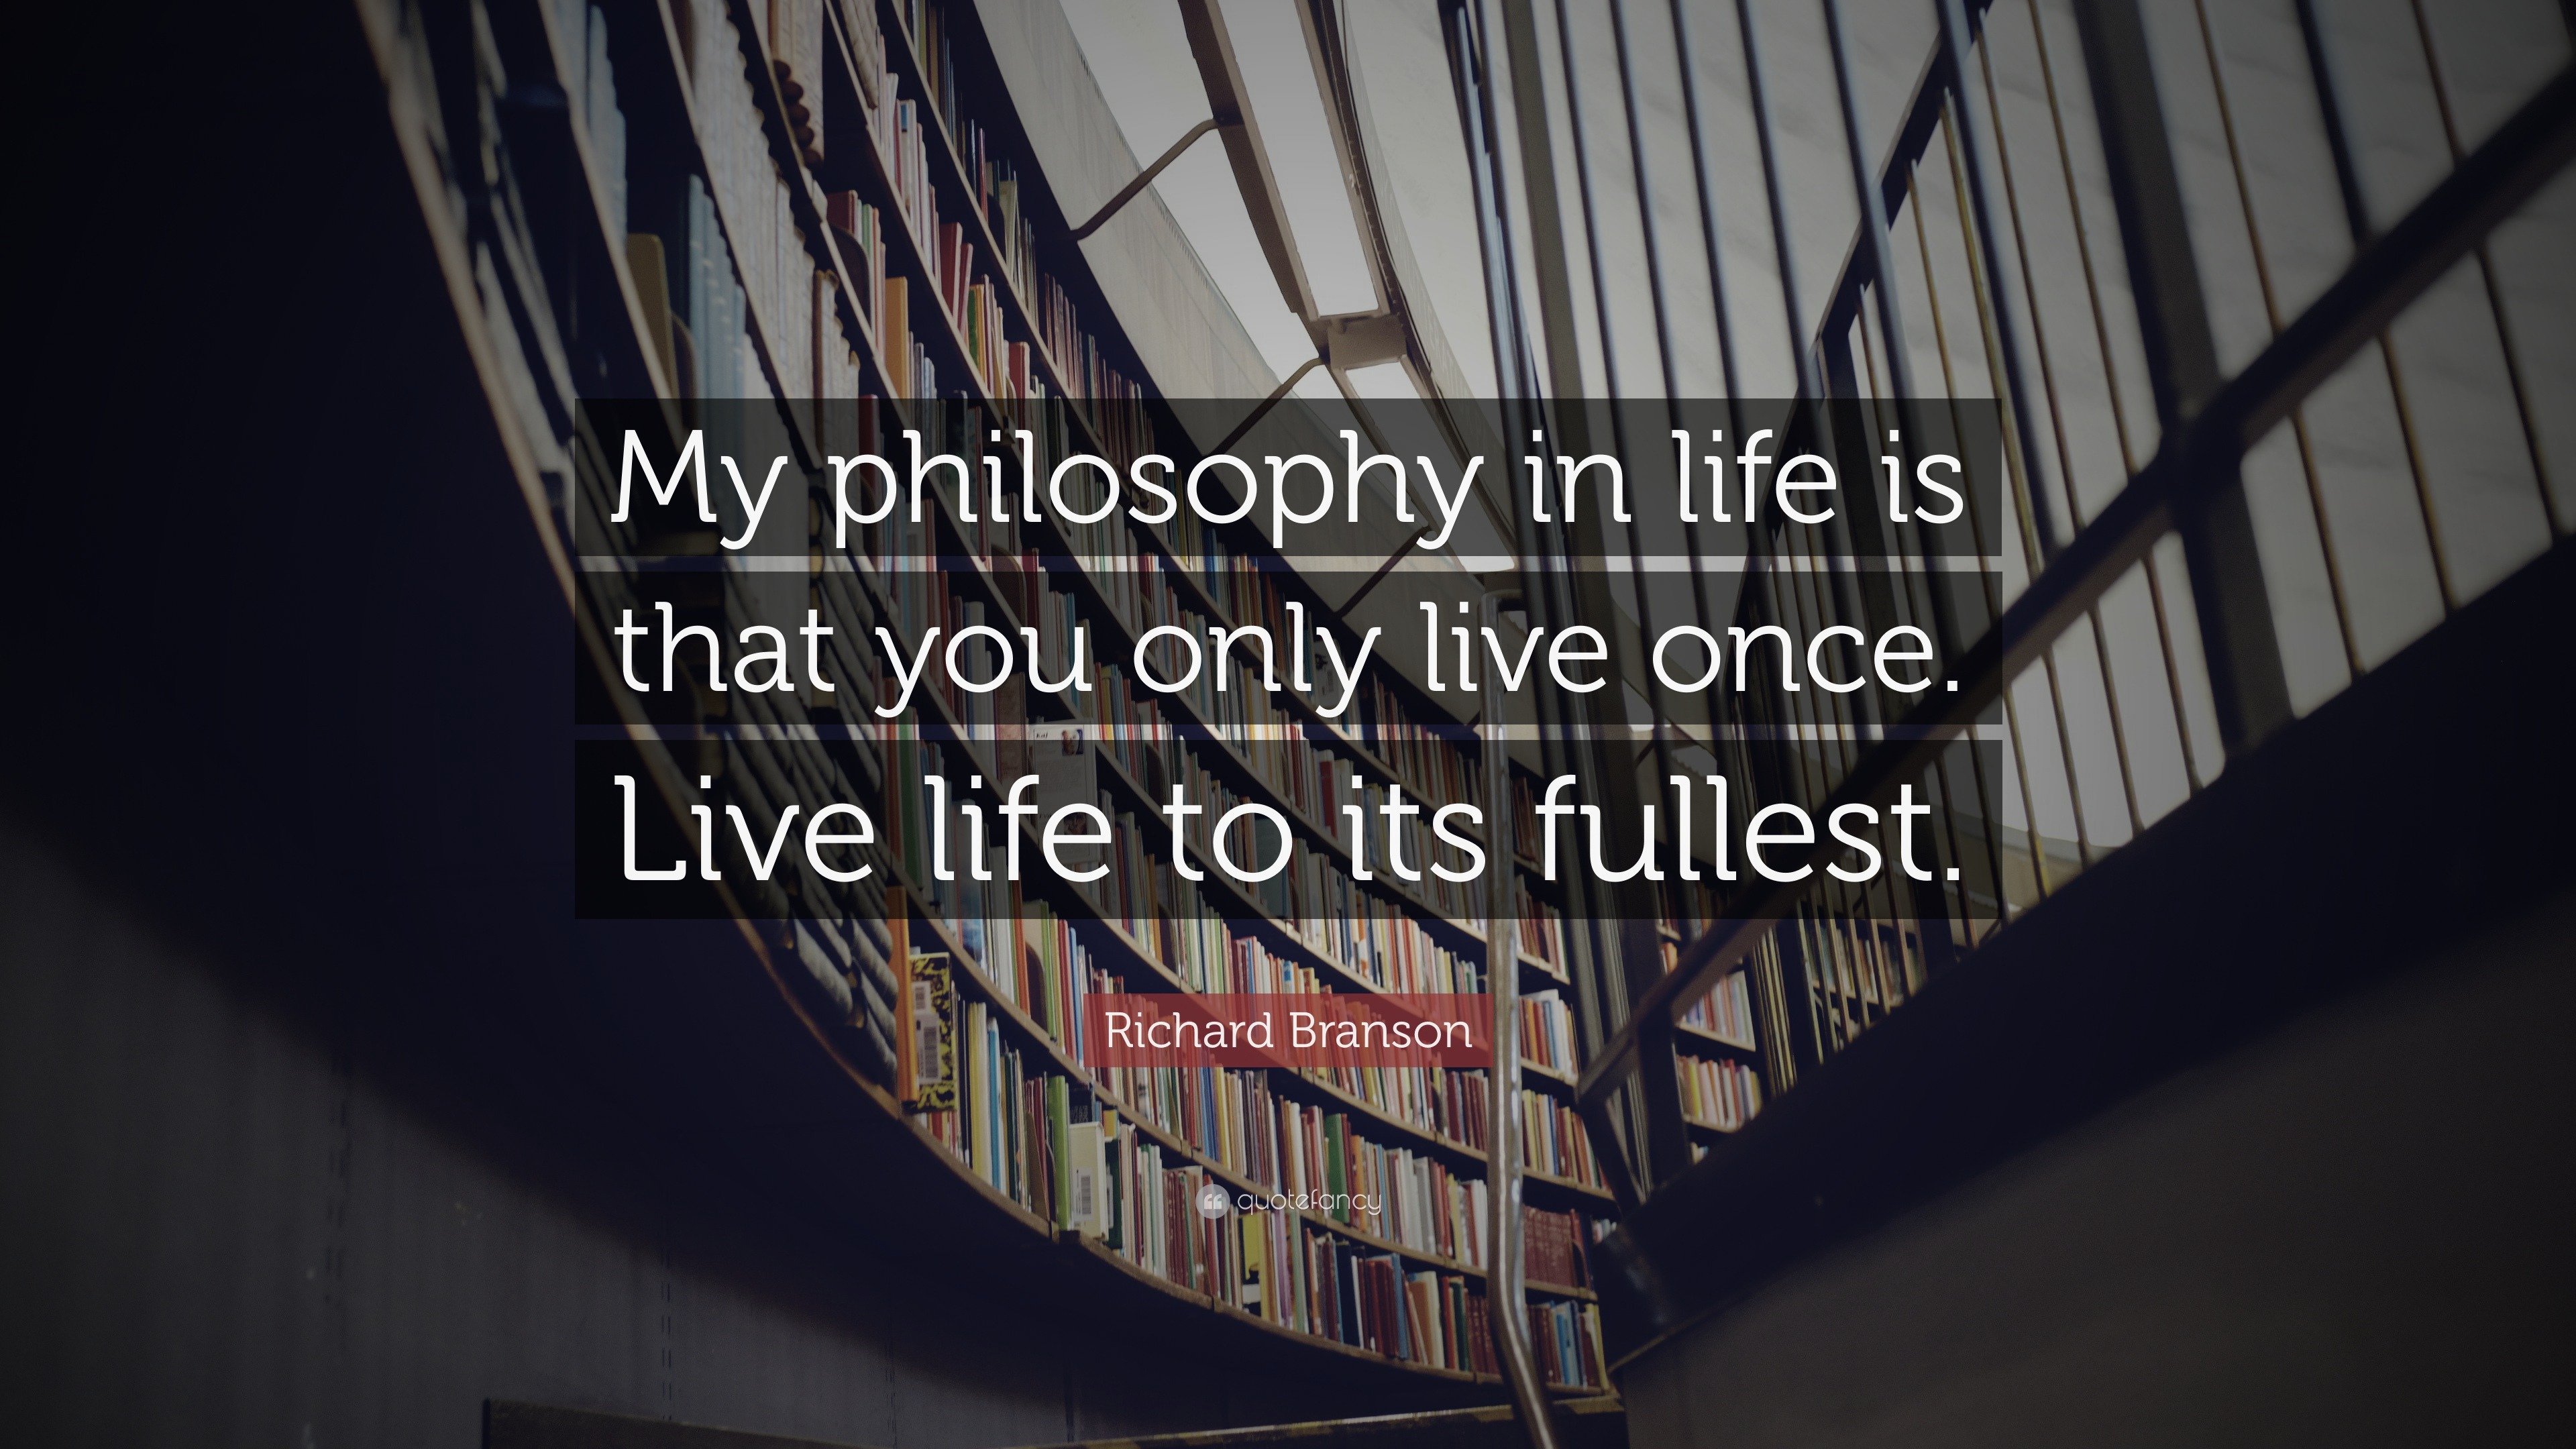 Richard Branson Quote “My philosophy in life is that you only live once